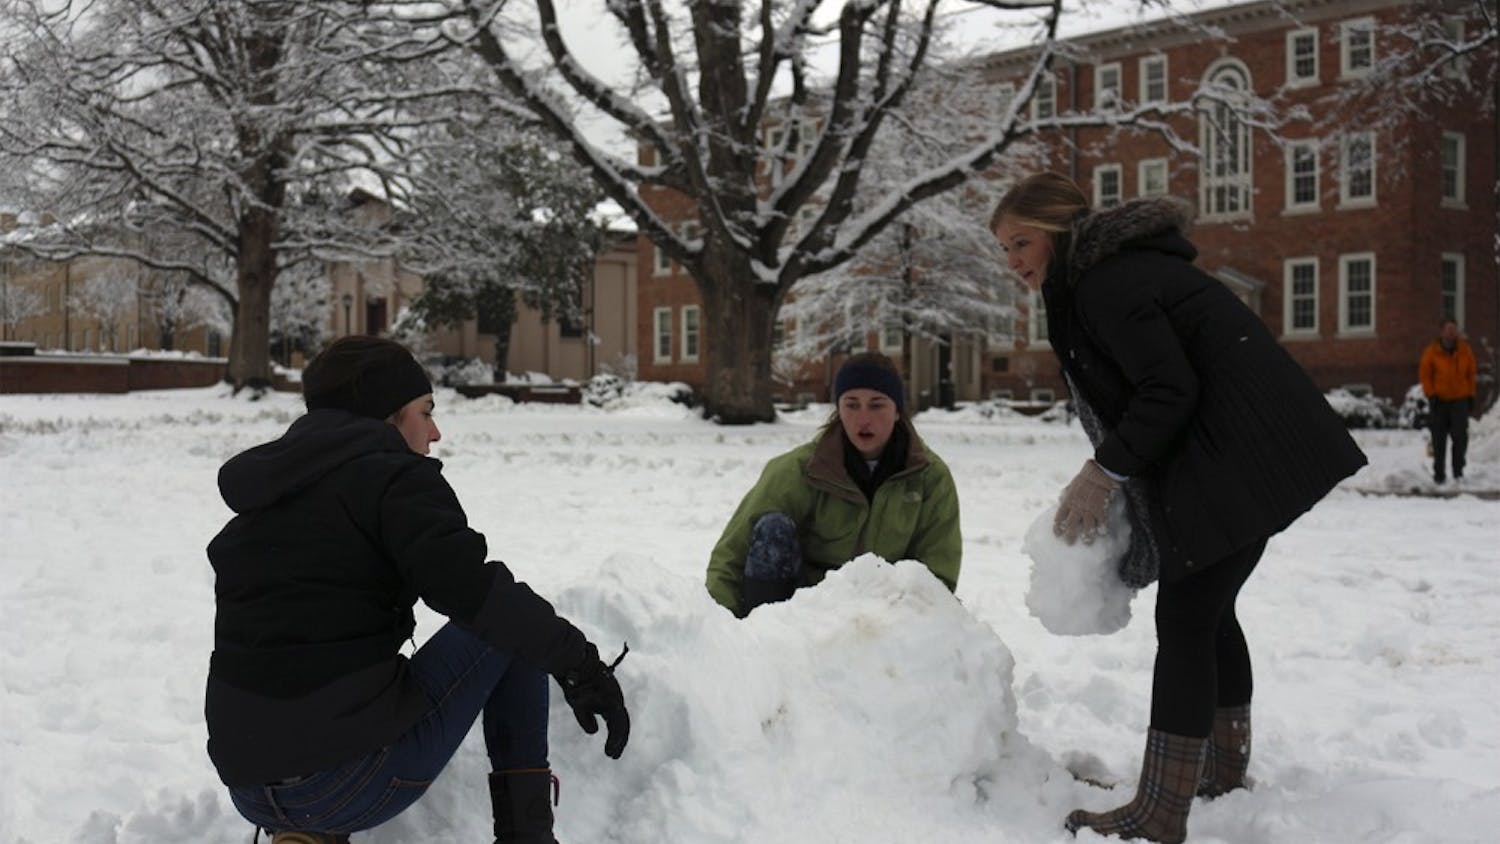 (From left to right) Megan Carlin, Sinclair McLean and Sarah Graves build an igloo on the lower quad in front of South Building on Thursday.